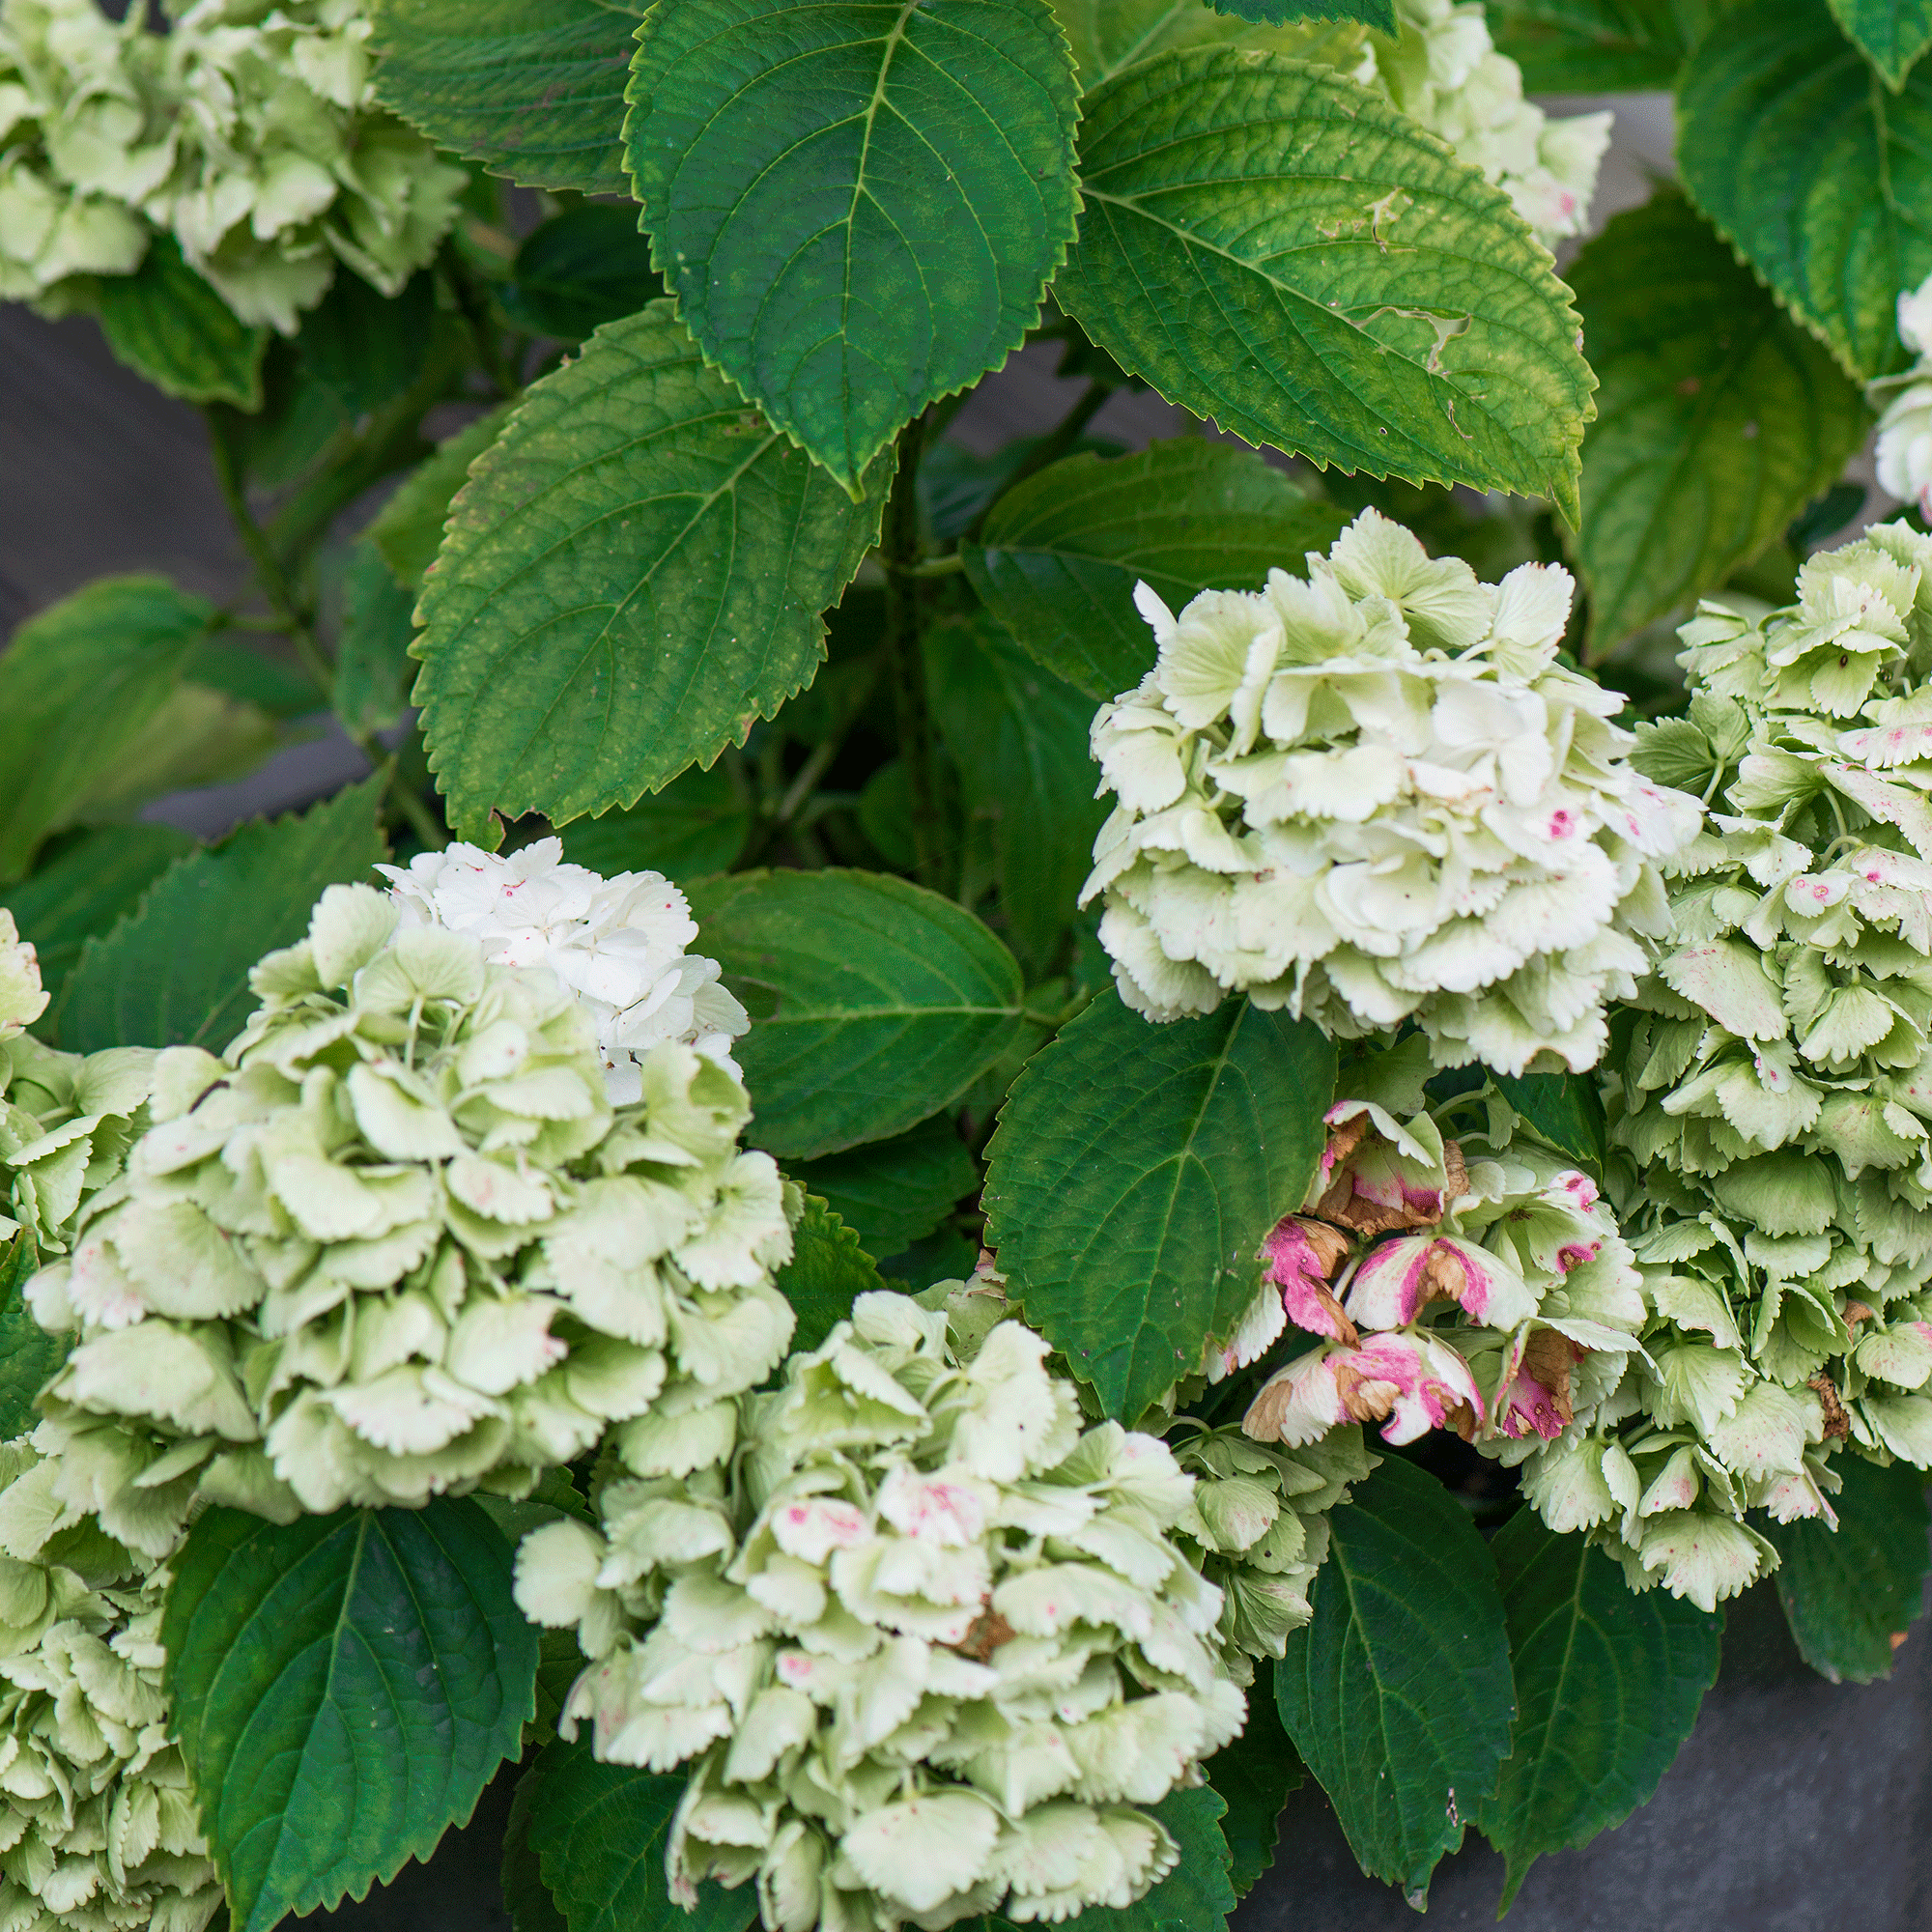 How to grow hydrangeas in pots – an easy guide for beautiful containers